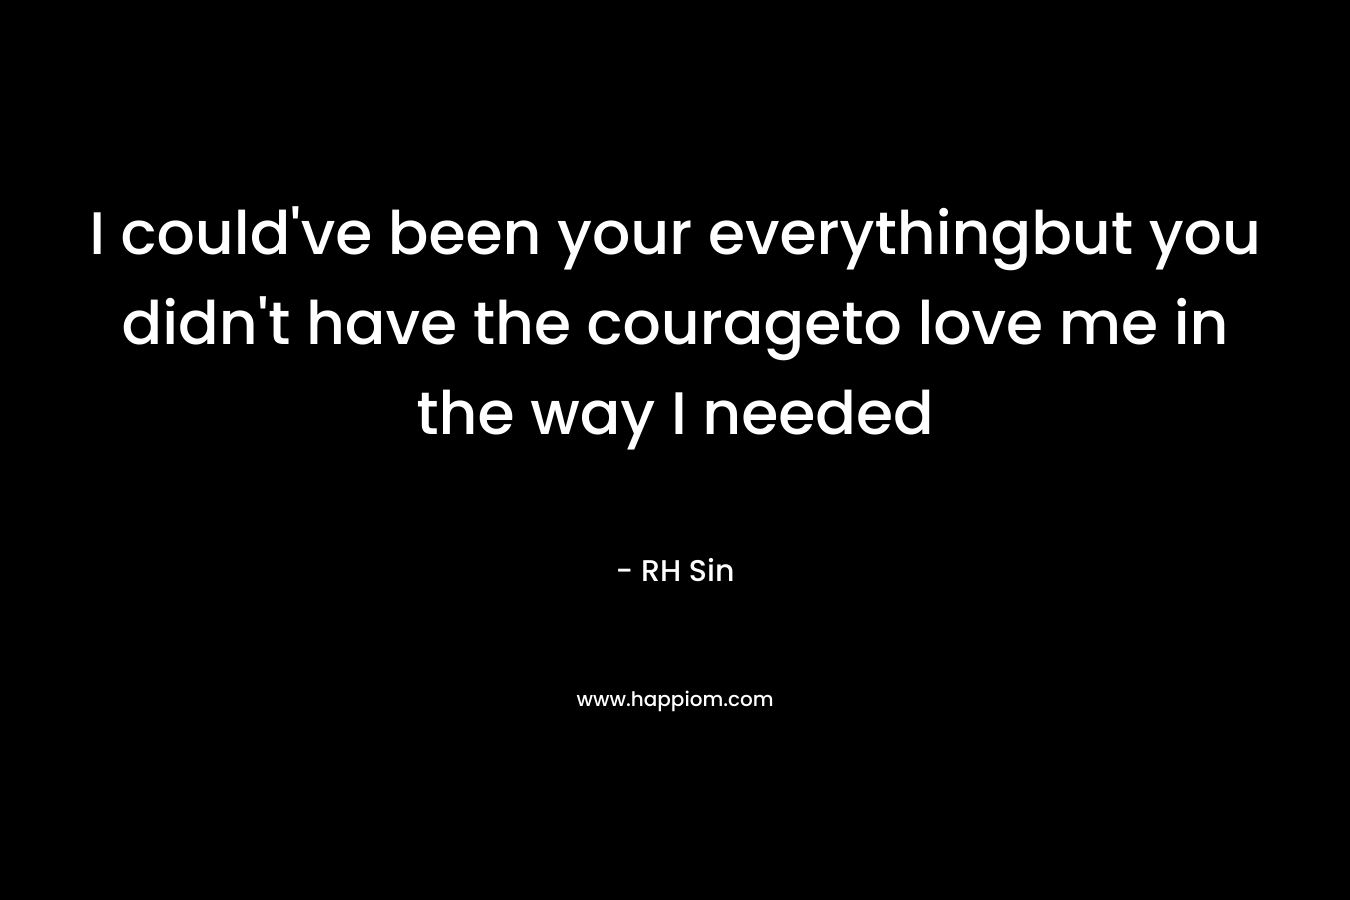 I could’ve been your everythingbut you didn’t have the courageto love me in the way I needed – RH Sin